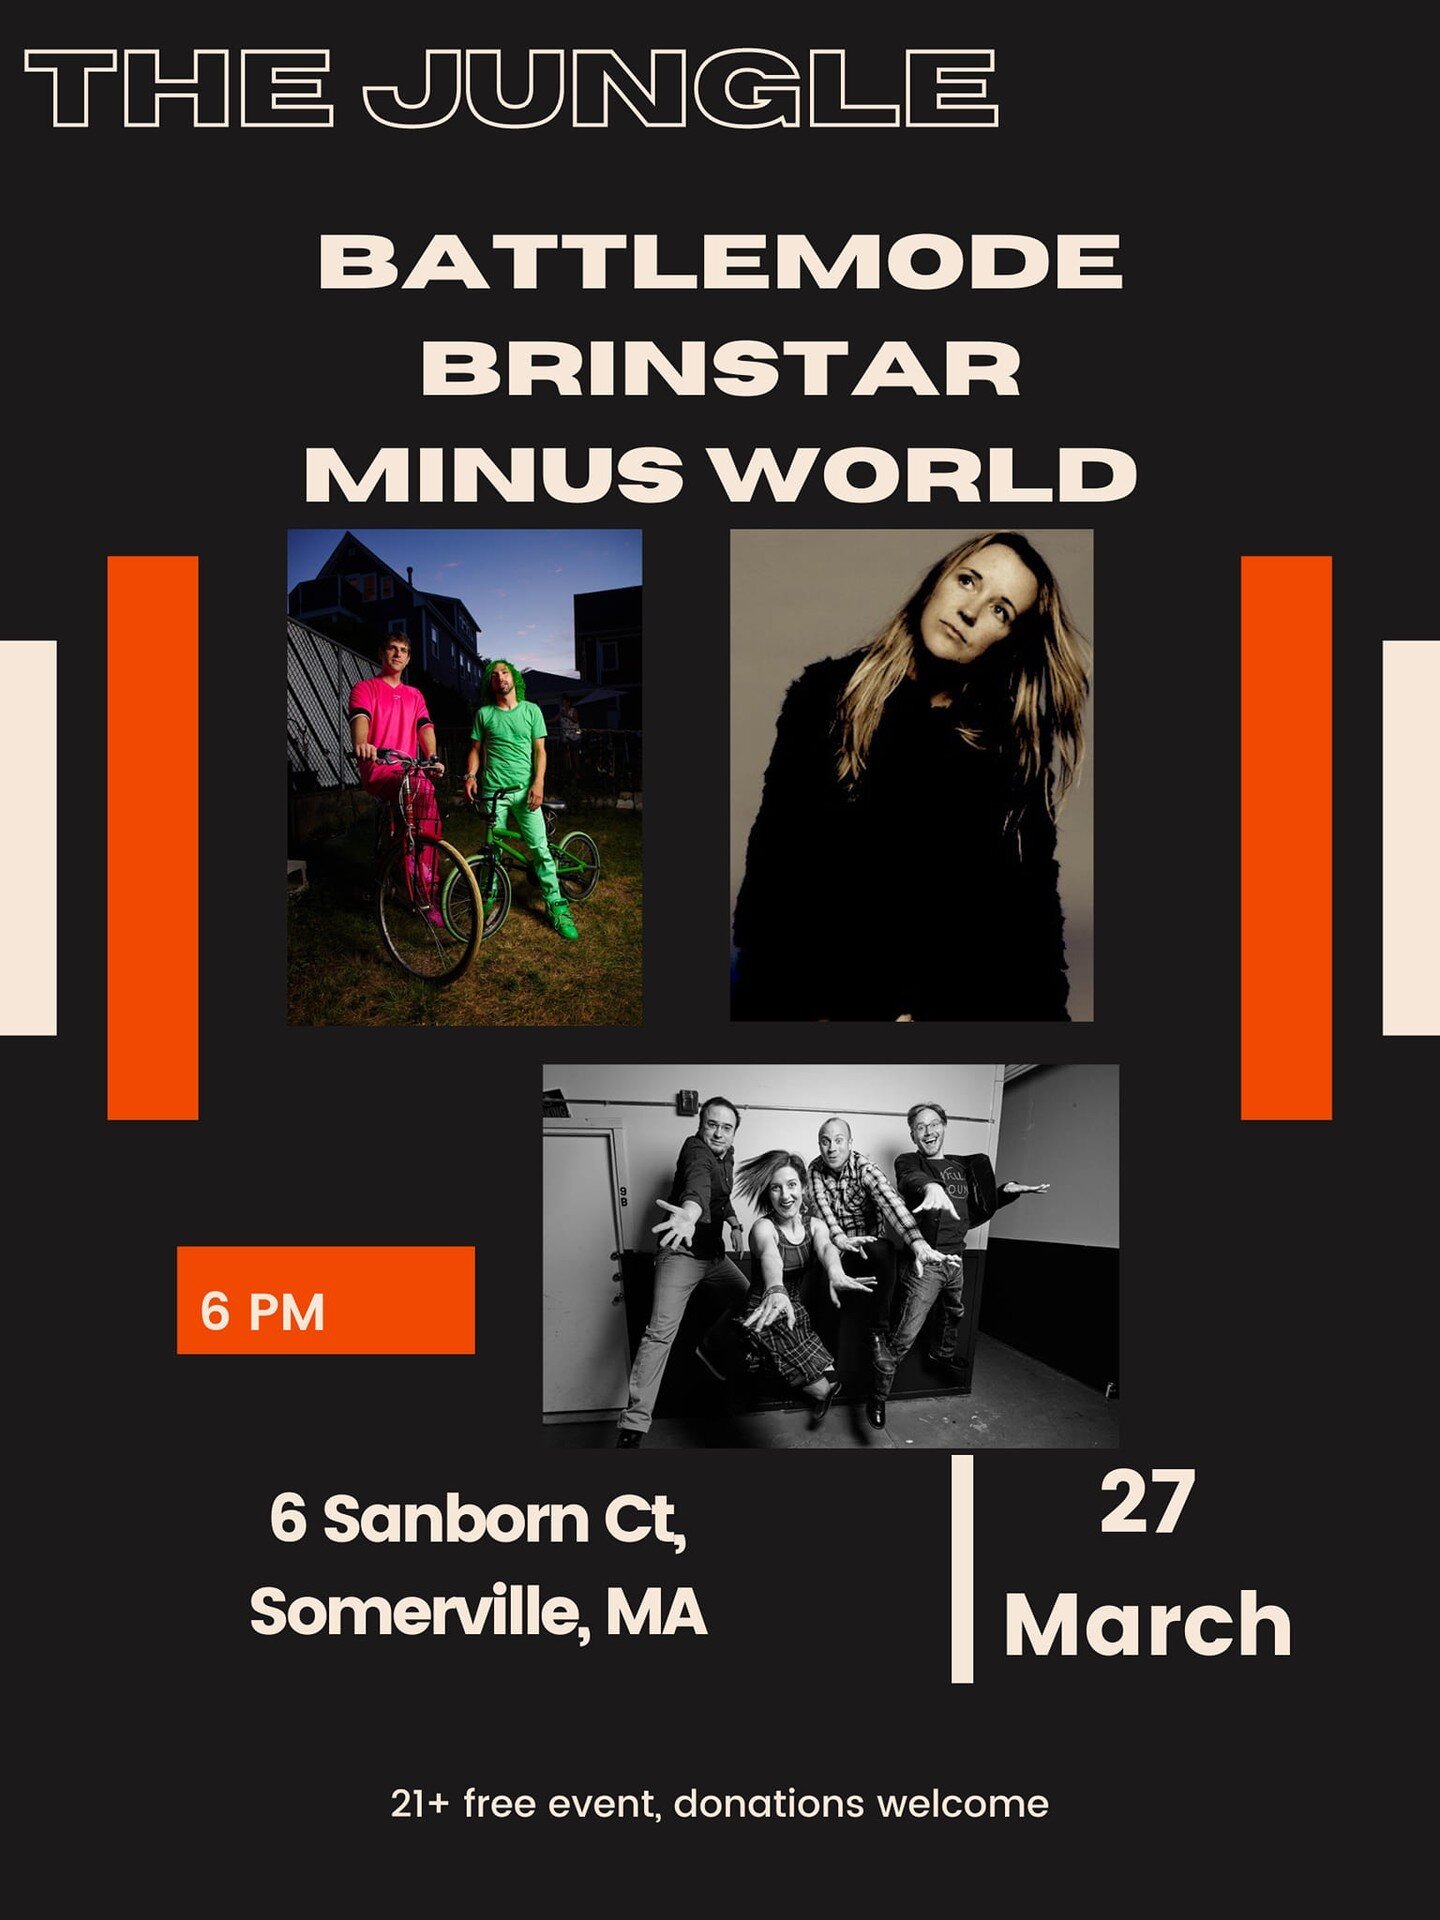 Excited to be playing the Jungle, Monday March 27th!  With Battlemode and Brinstar!  21+ / Doors 6 PM / Free